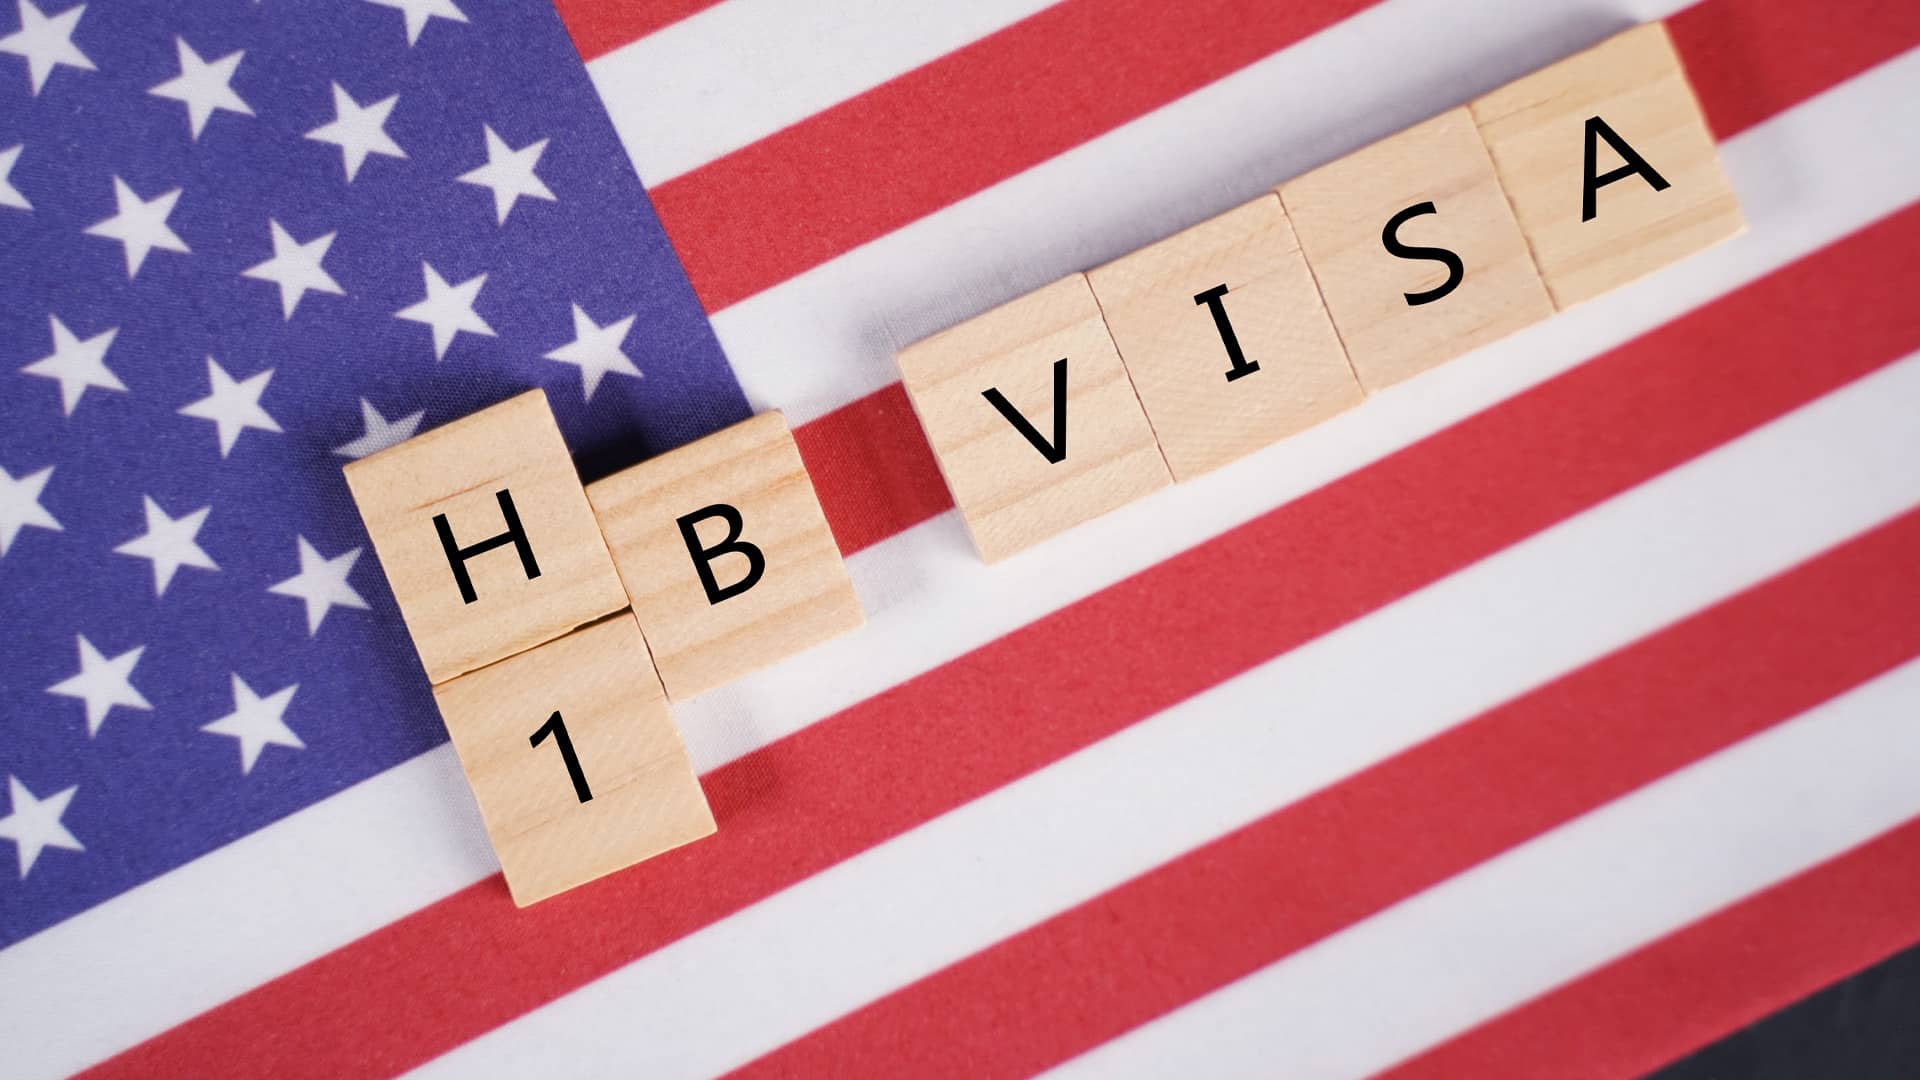 US set to modernise H-1B visa registration after detecting fraud & abuse in computerised lottery system